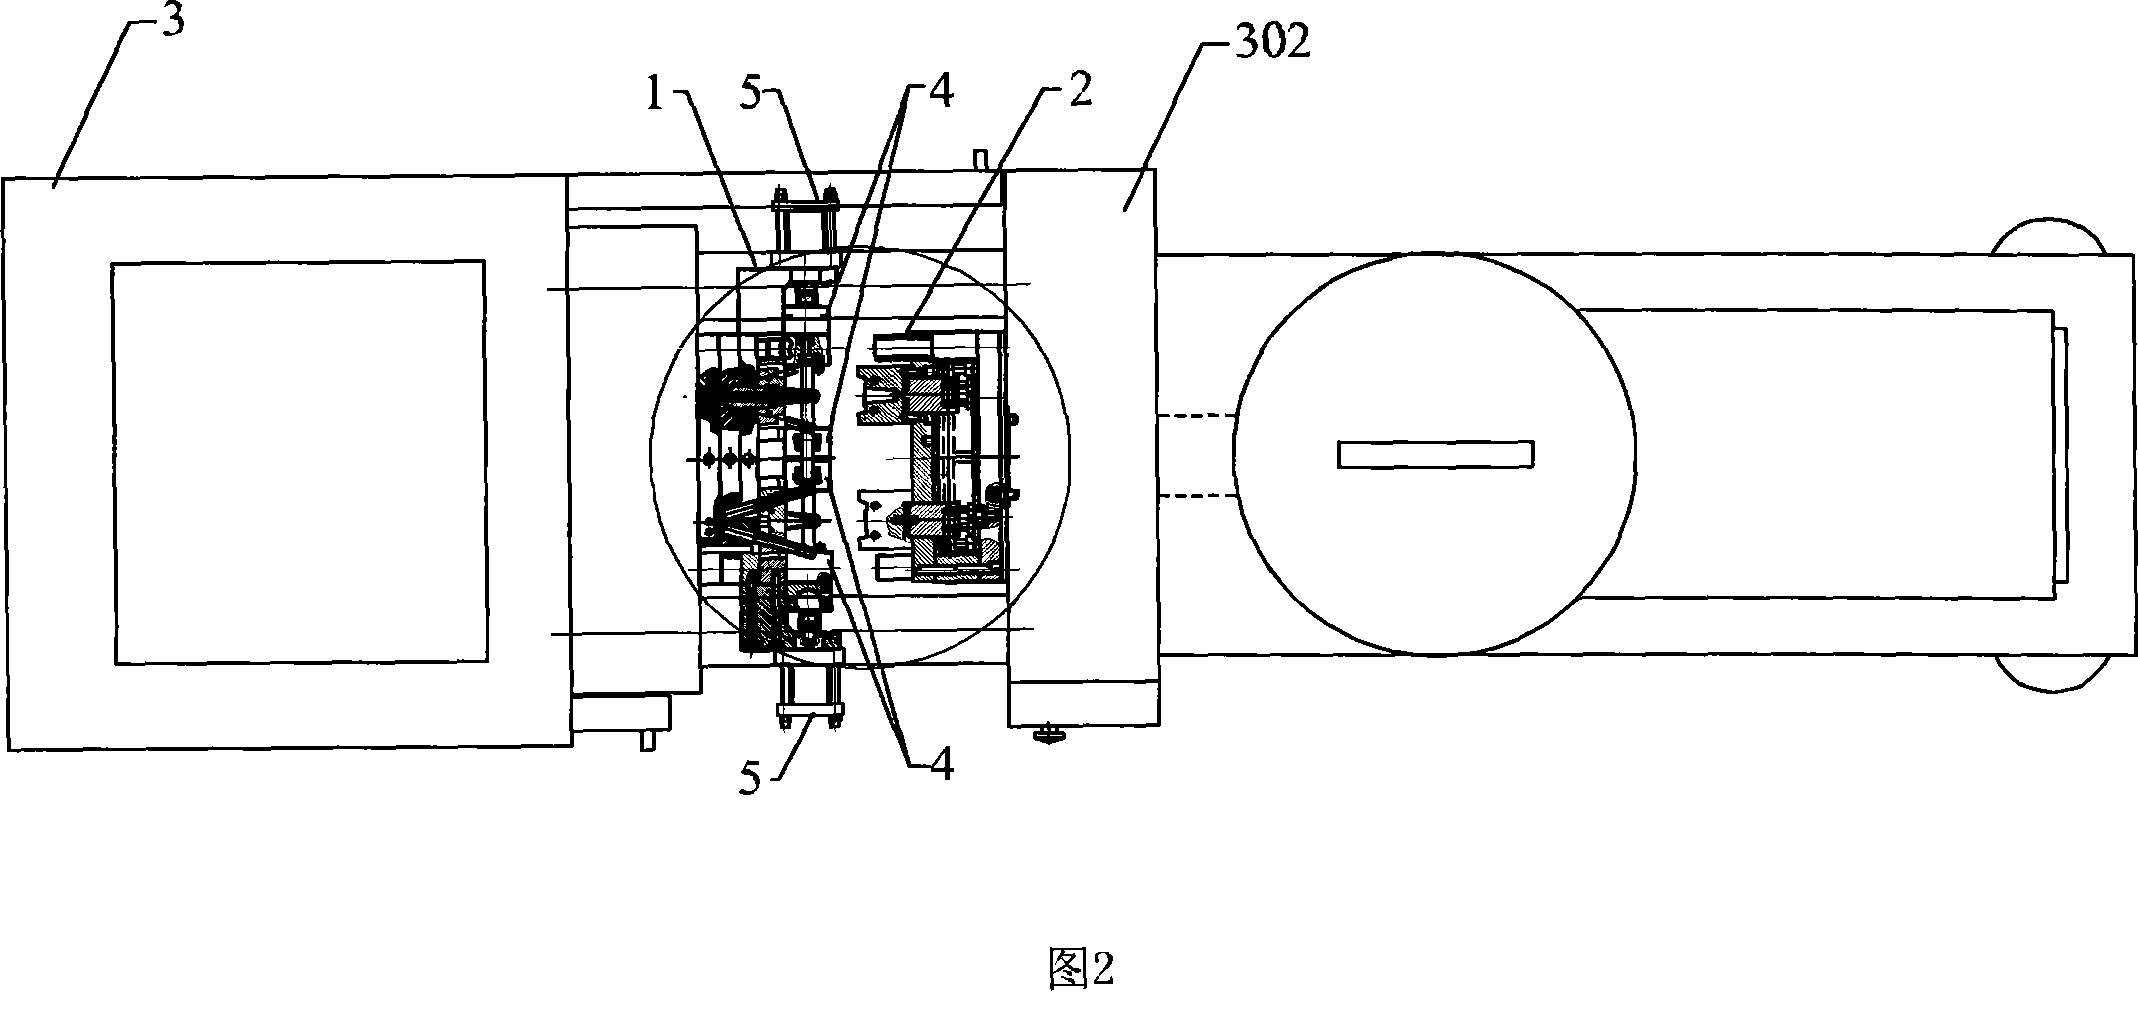 Die for injecting and blowing plastic hollow container forming container by one-step method and single working-station, and application thereof